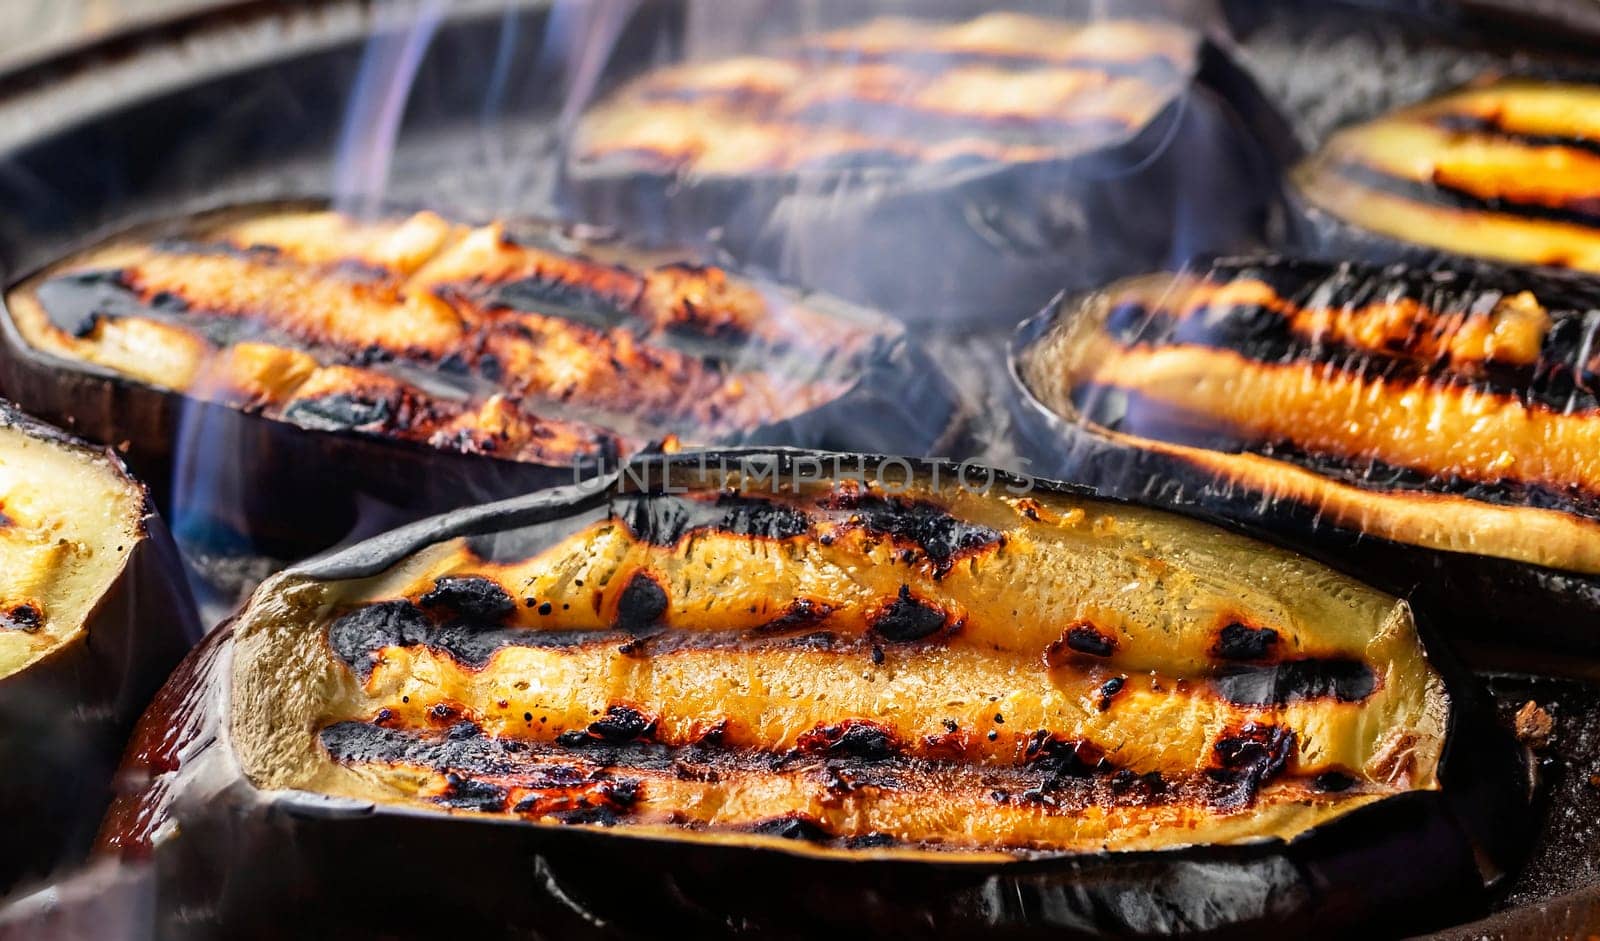 Eggplant on coals. Cooking charcoal closeup. Top view. Barbecue day, Grilled eggplants, concept healthy food